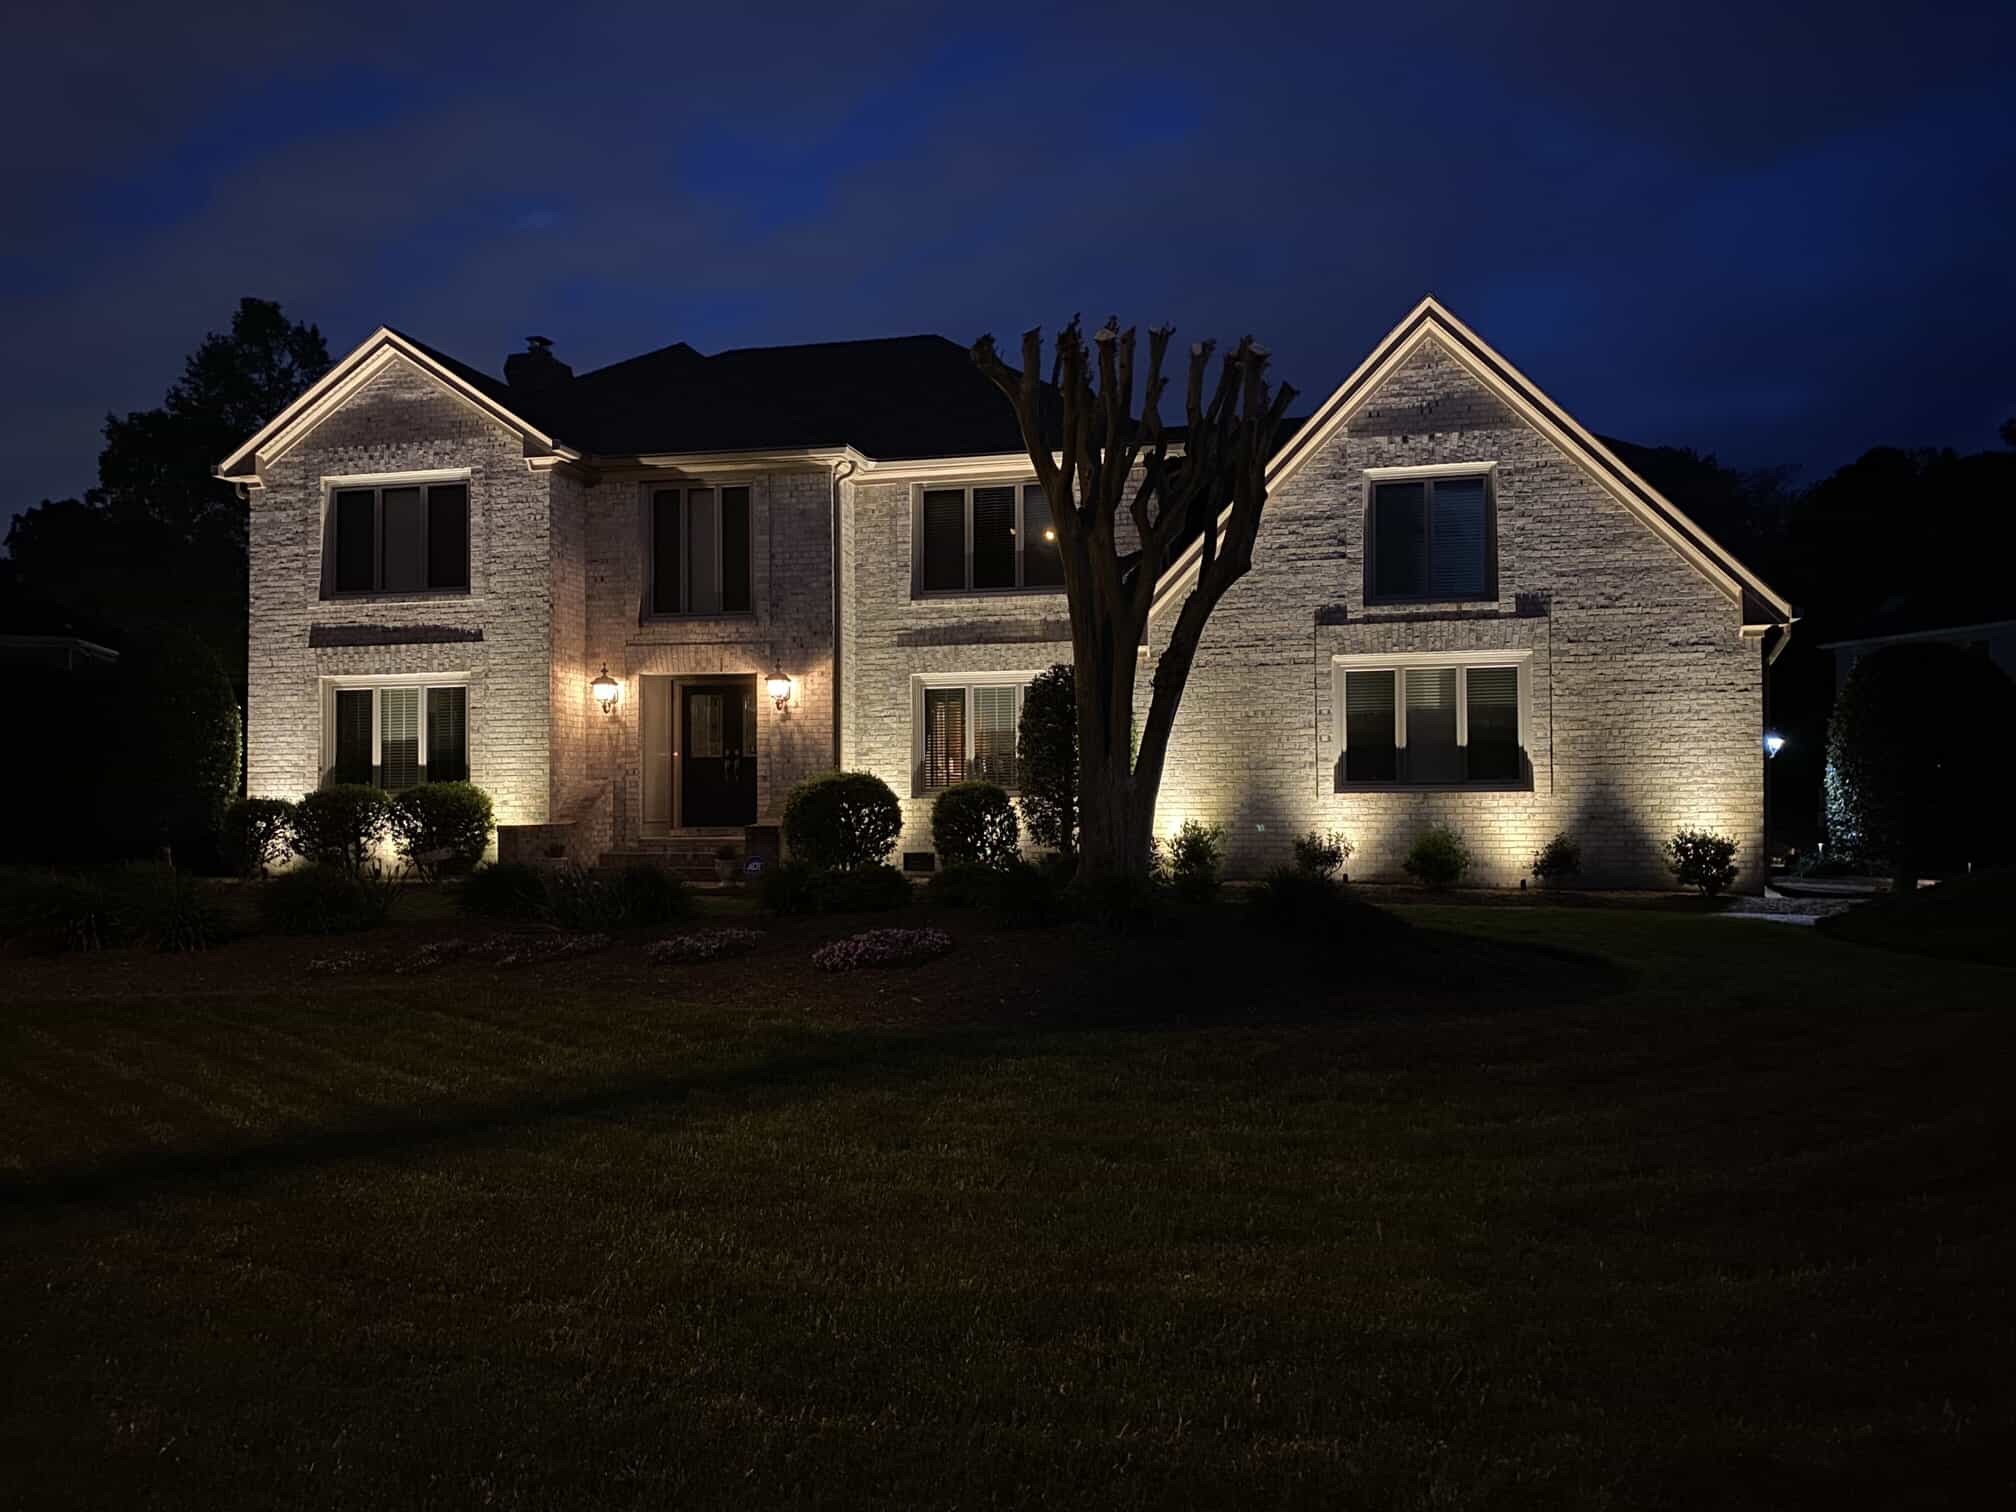 outdoor illuminating lights on a home at night 